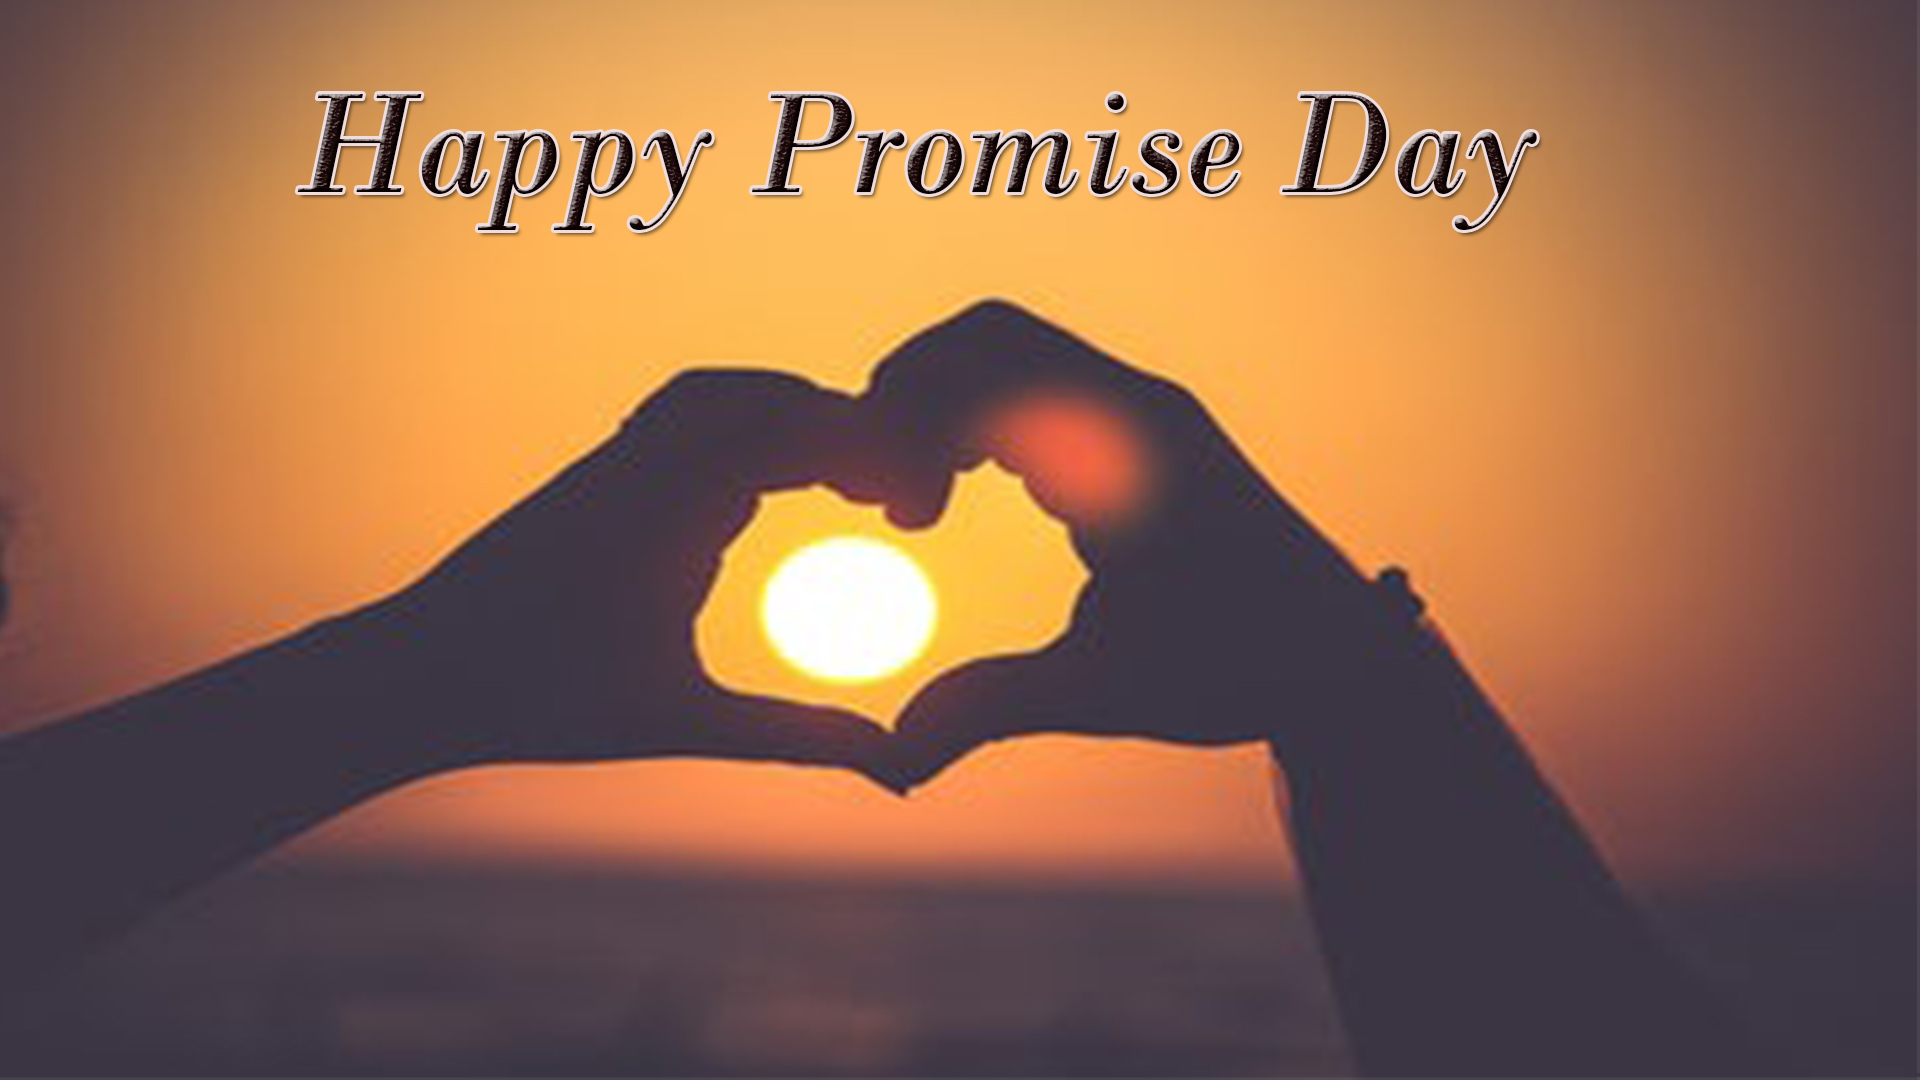 Happy Promise Day Wishes, Quotes & Messages With Images